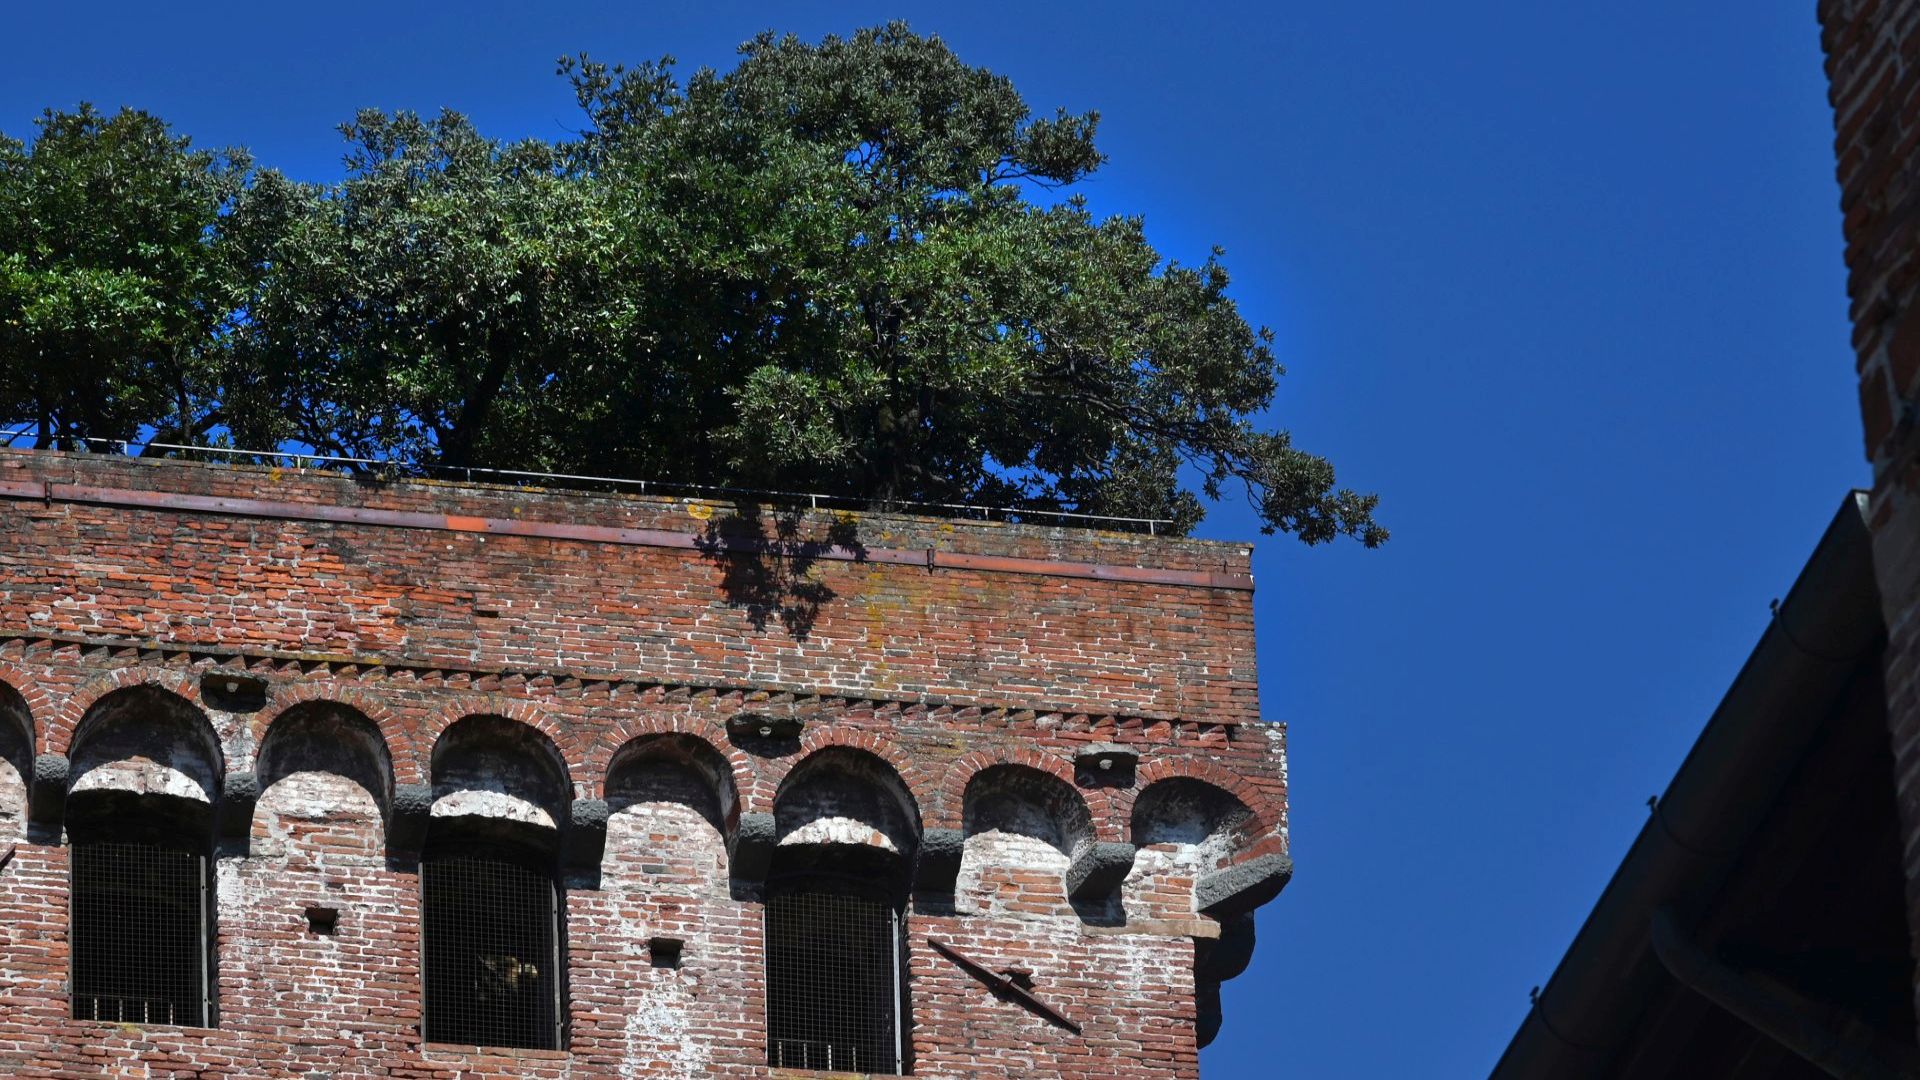 holm oaks on the Guinigi Tower in Lucca